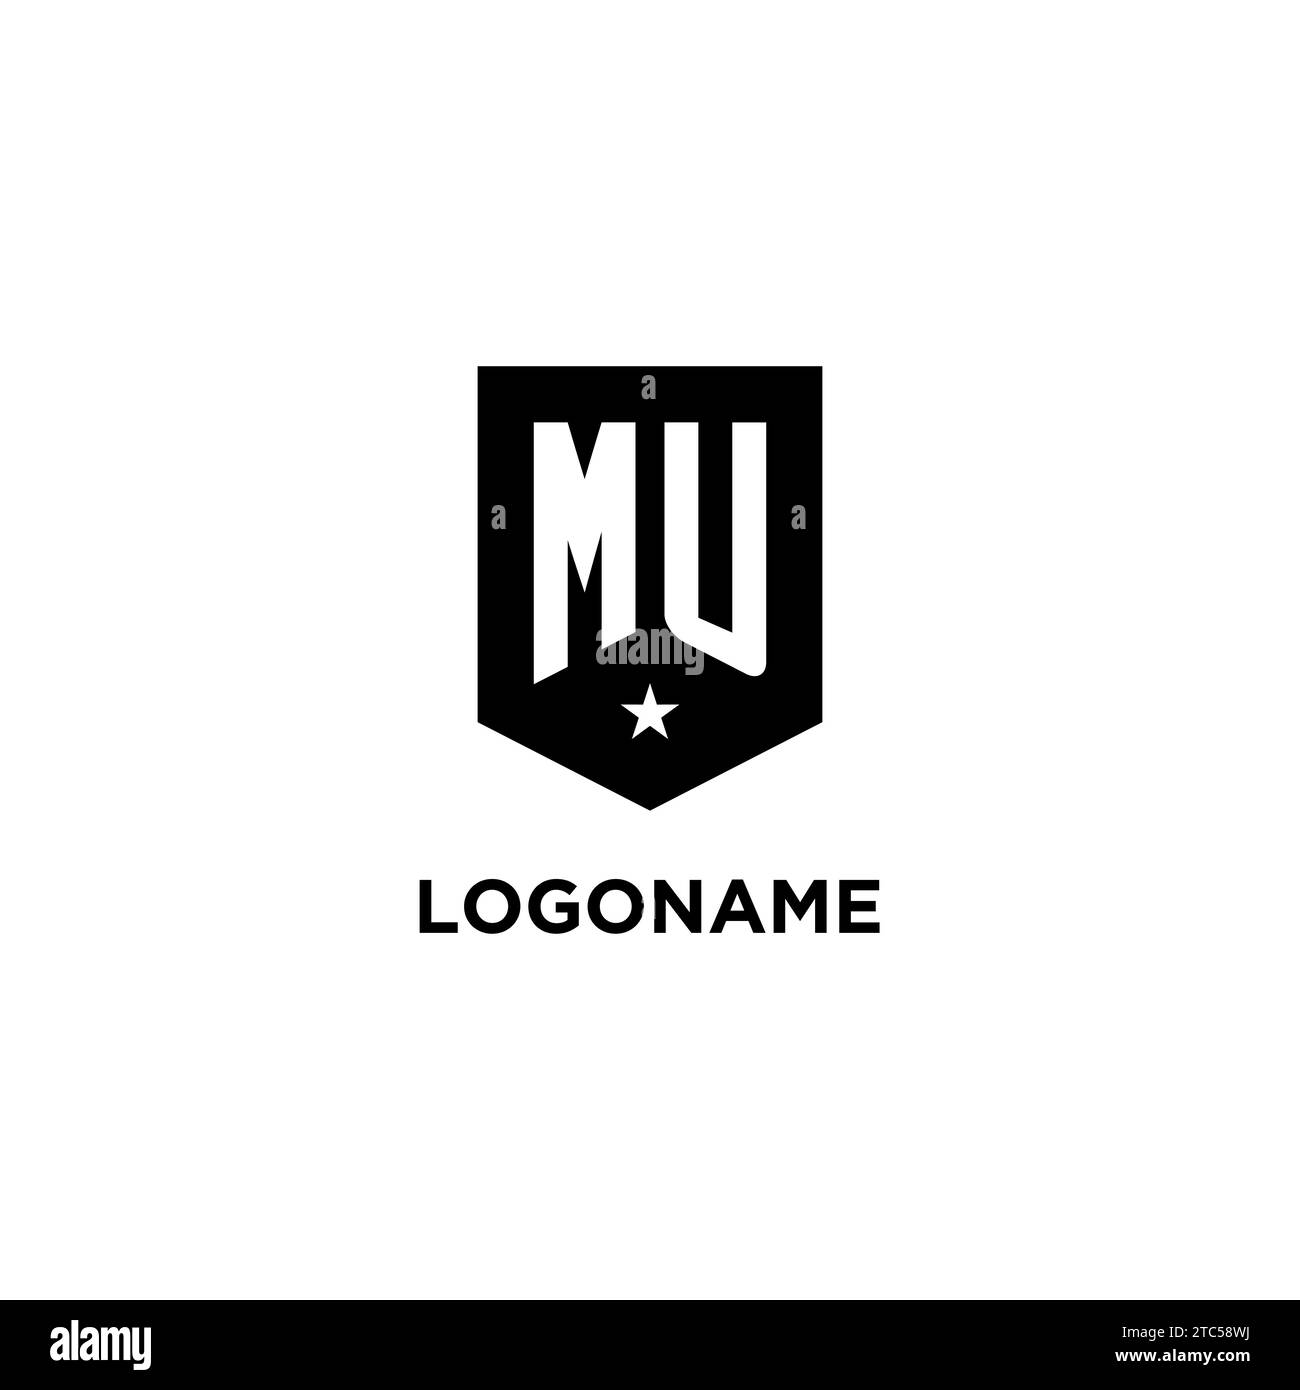 MU monogram initial logo with geometric shield and star icon design style ideas Stock Vector